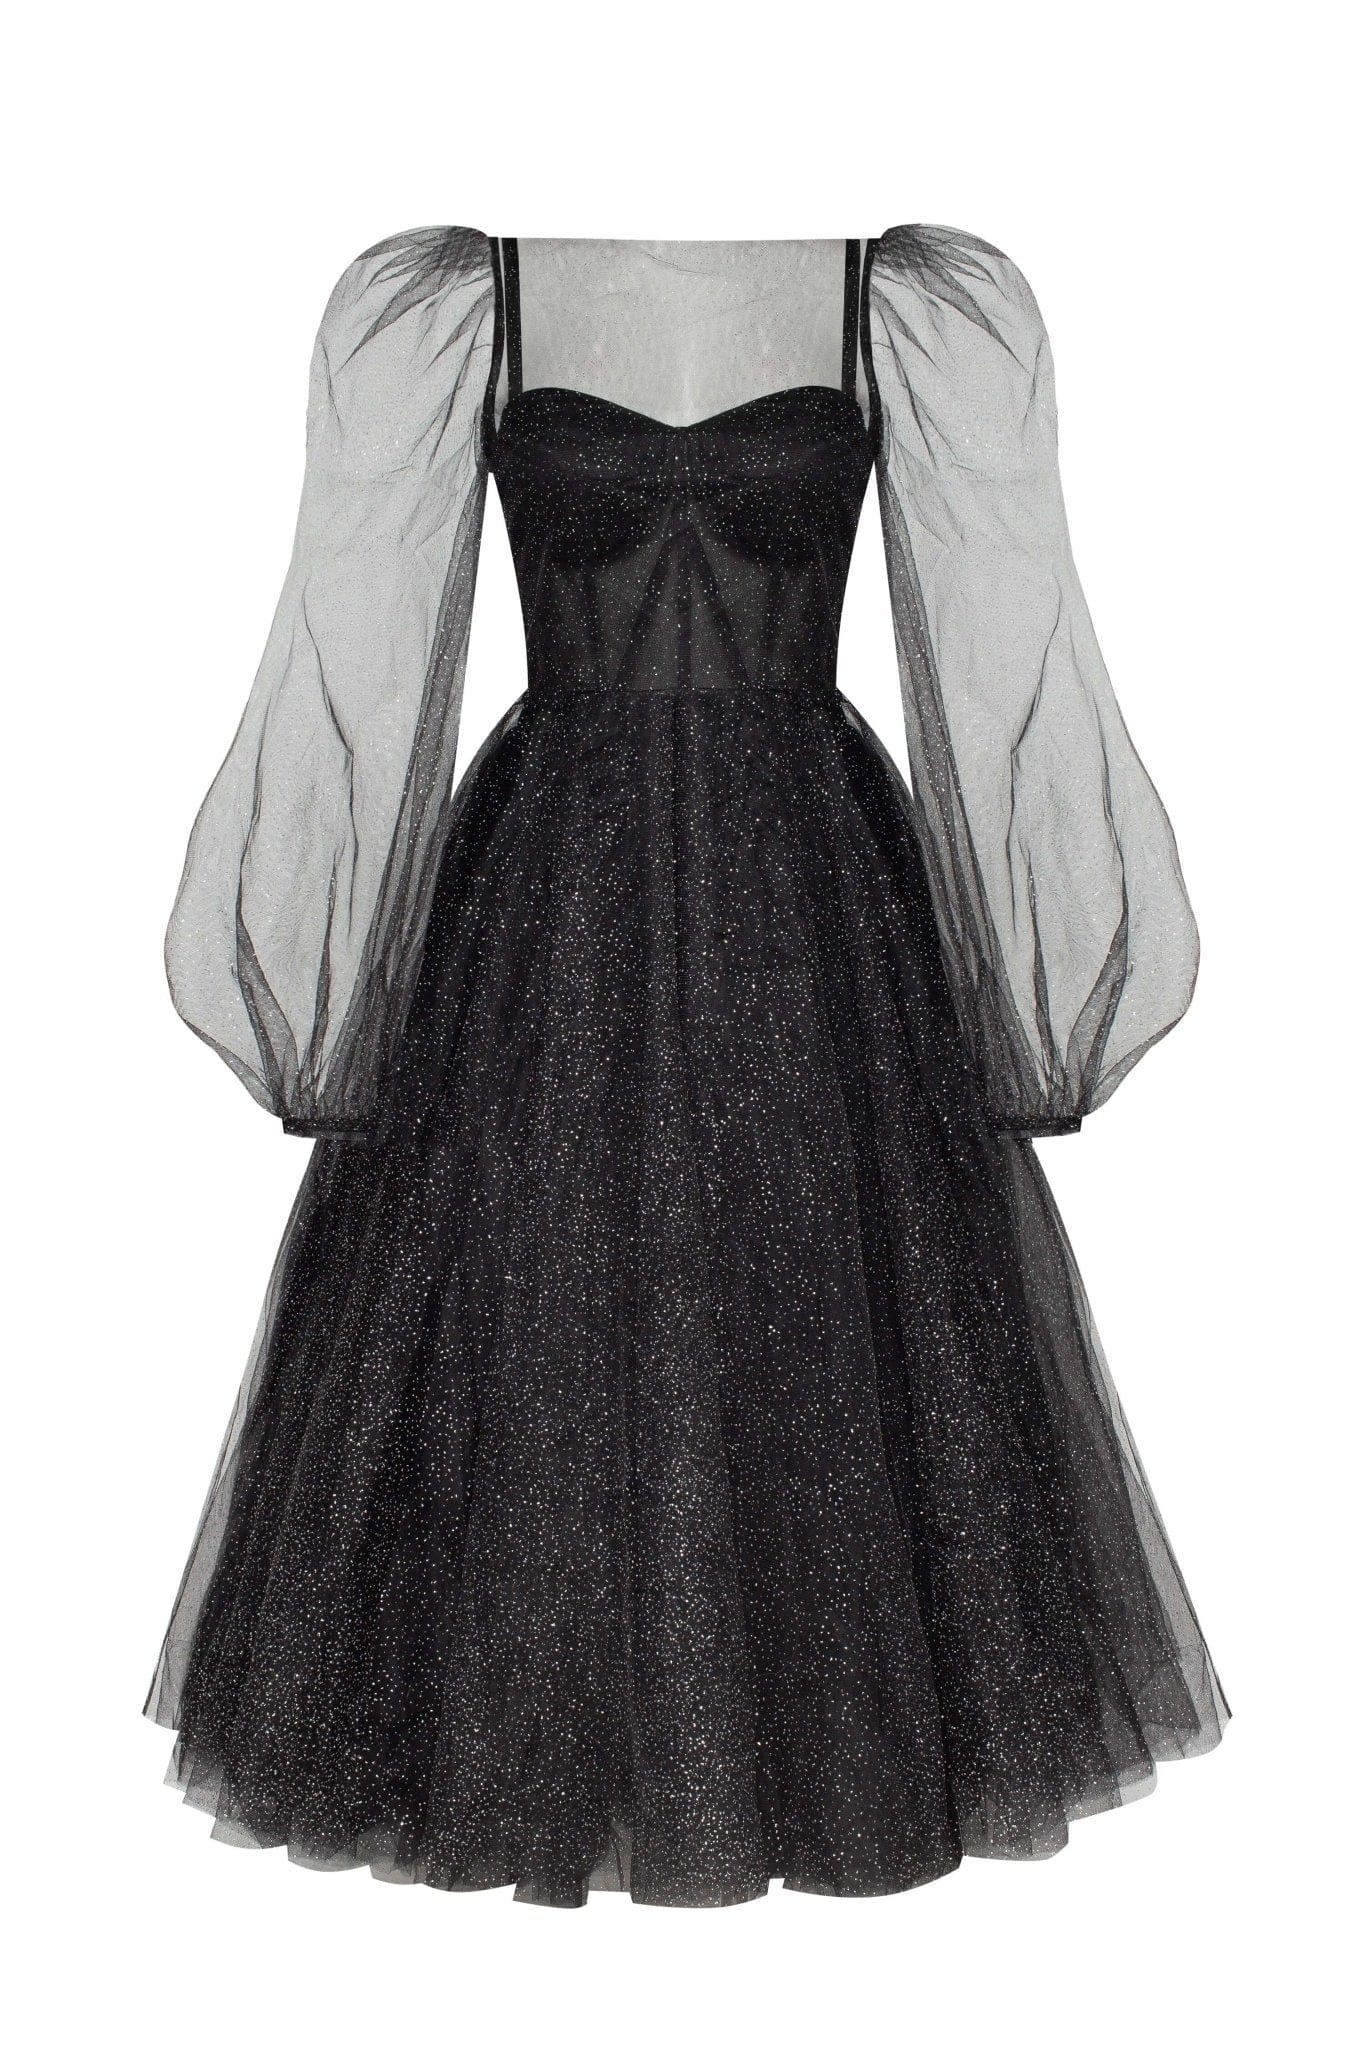 Combination sparkly tulle dress - Milla